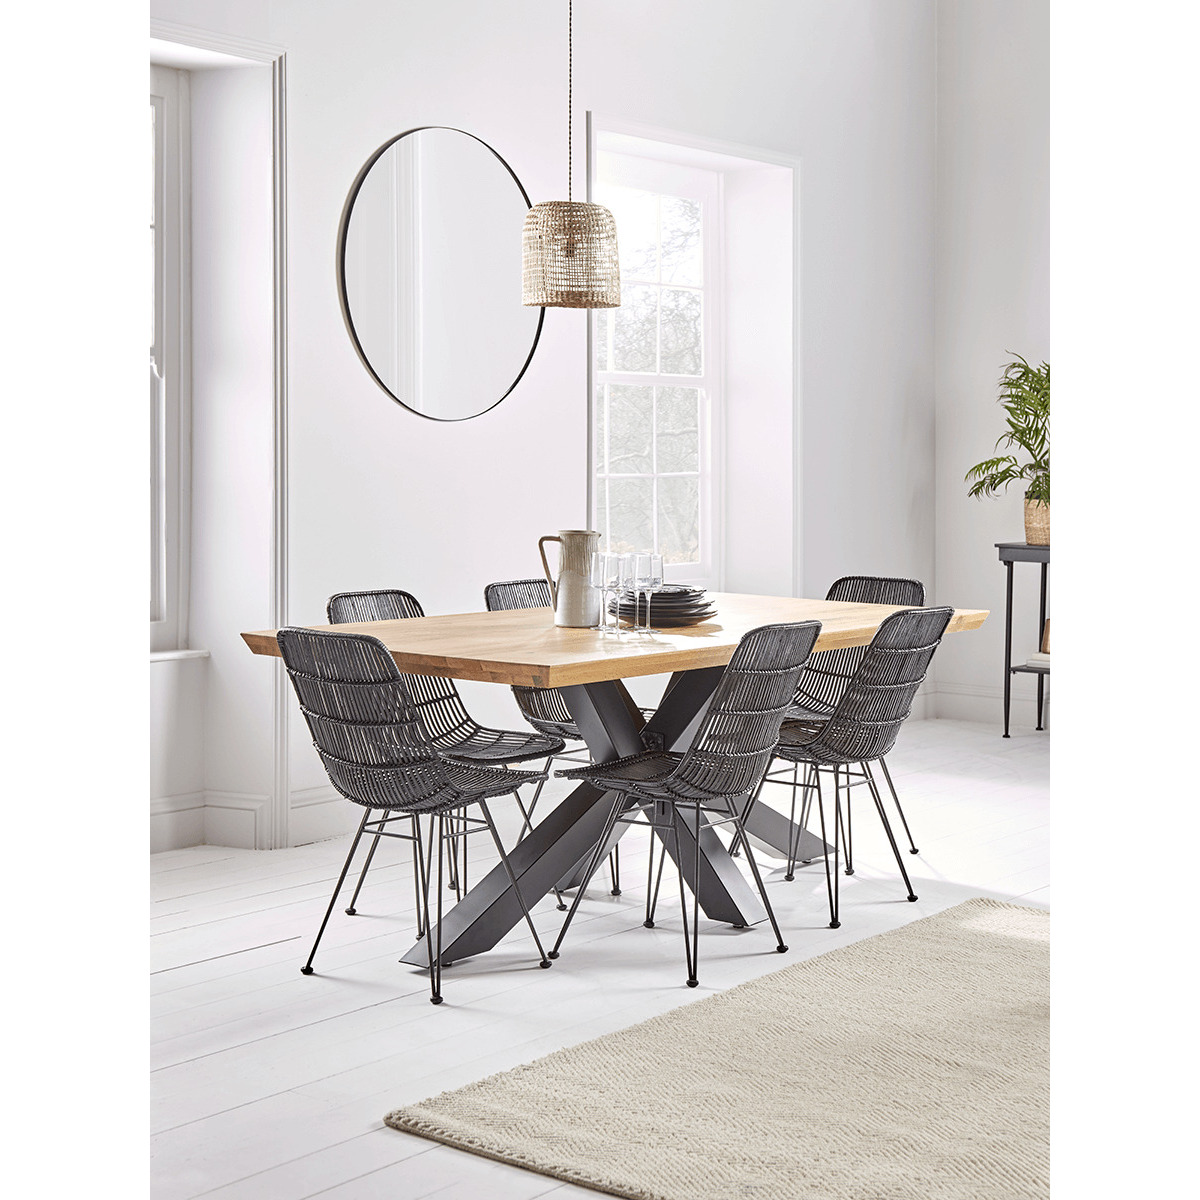 Hoxton Oak Dining Table - image 1